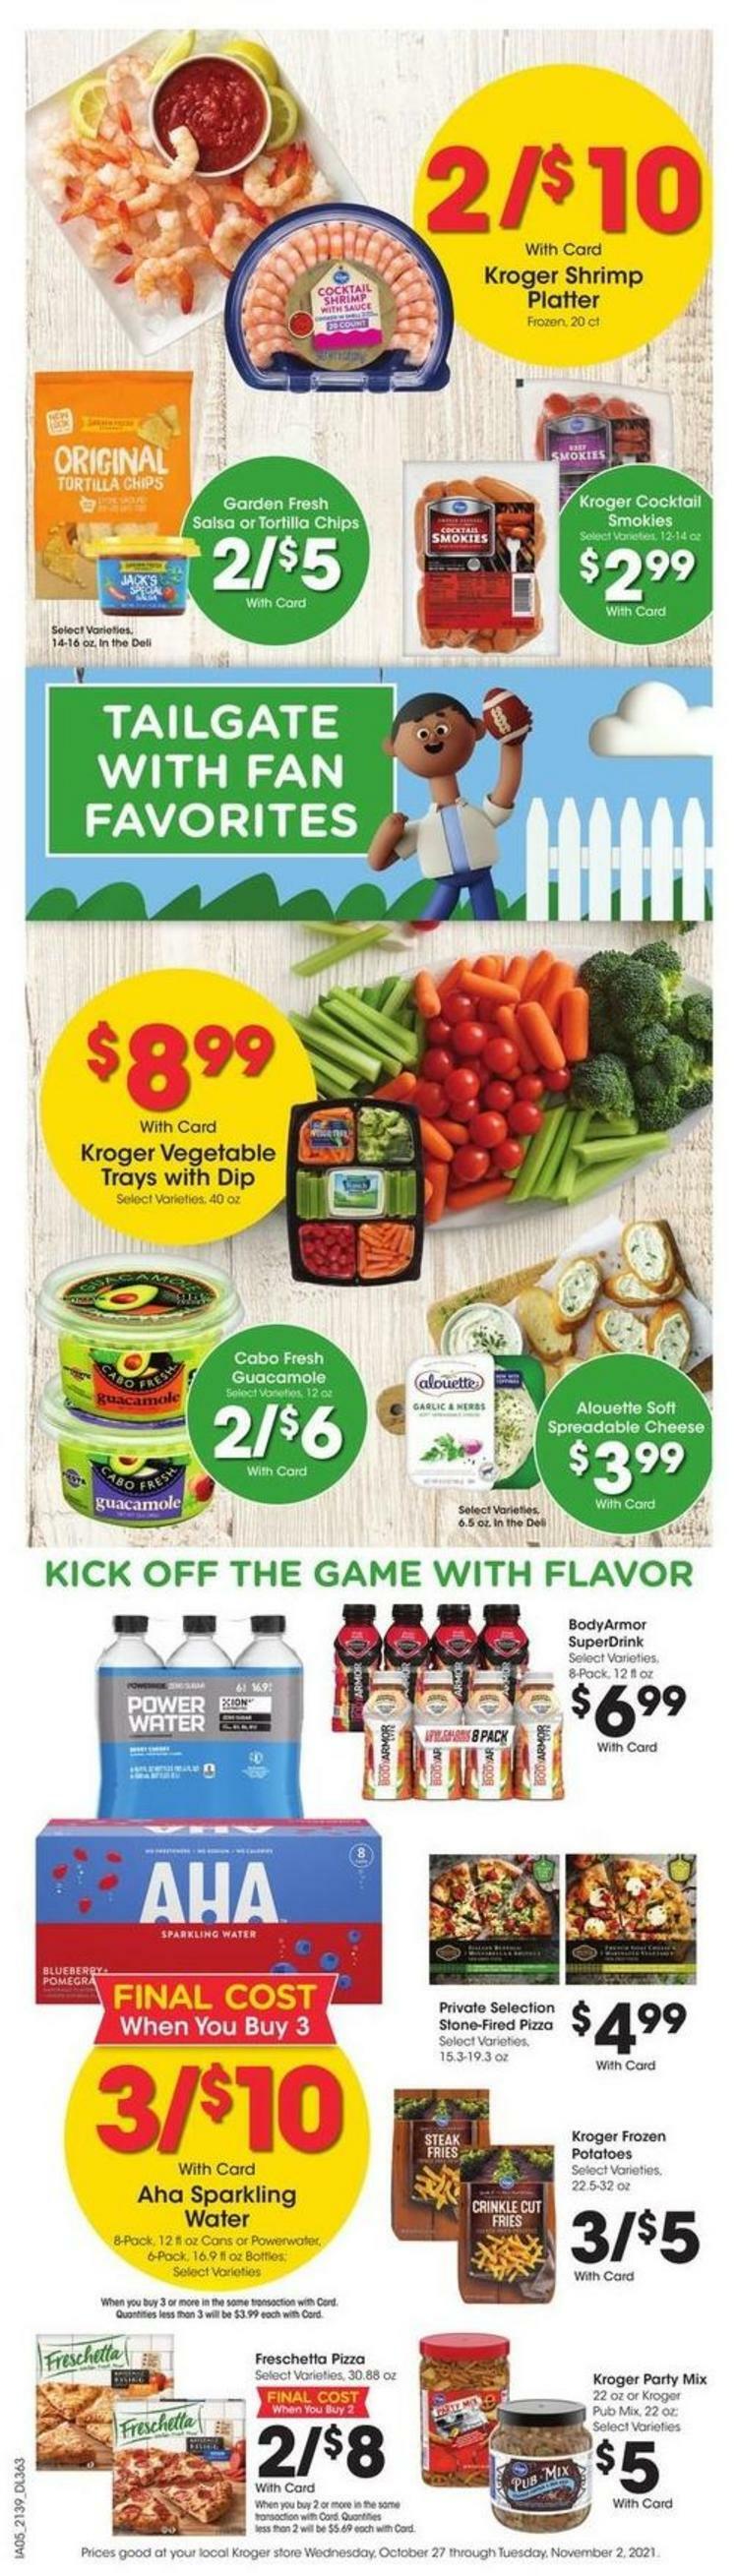 Kroger Weekly Ad from October 27